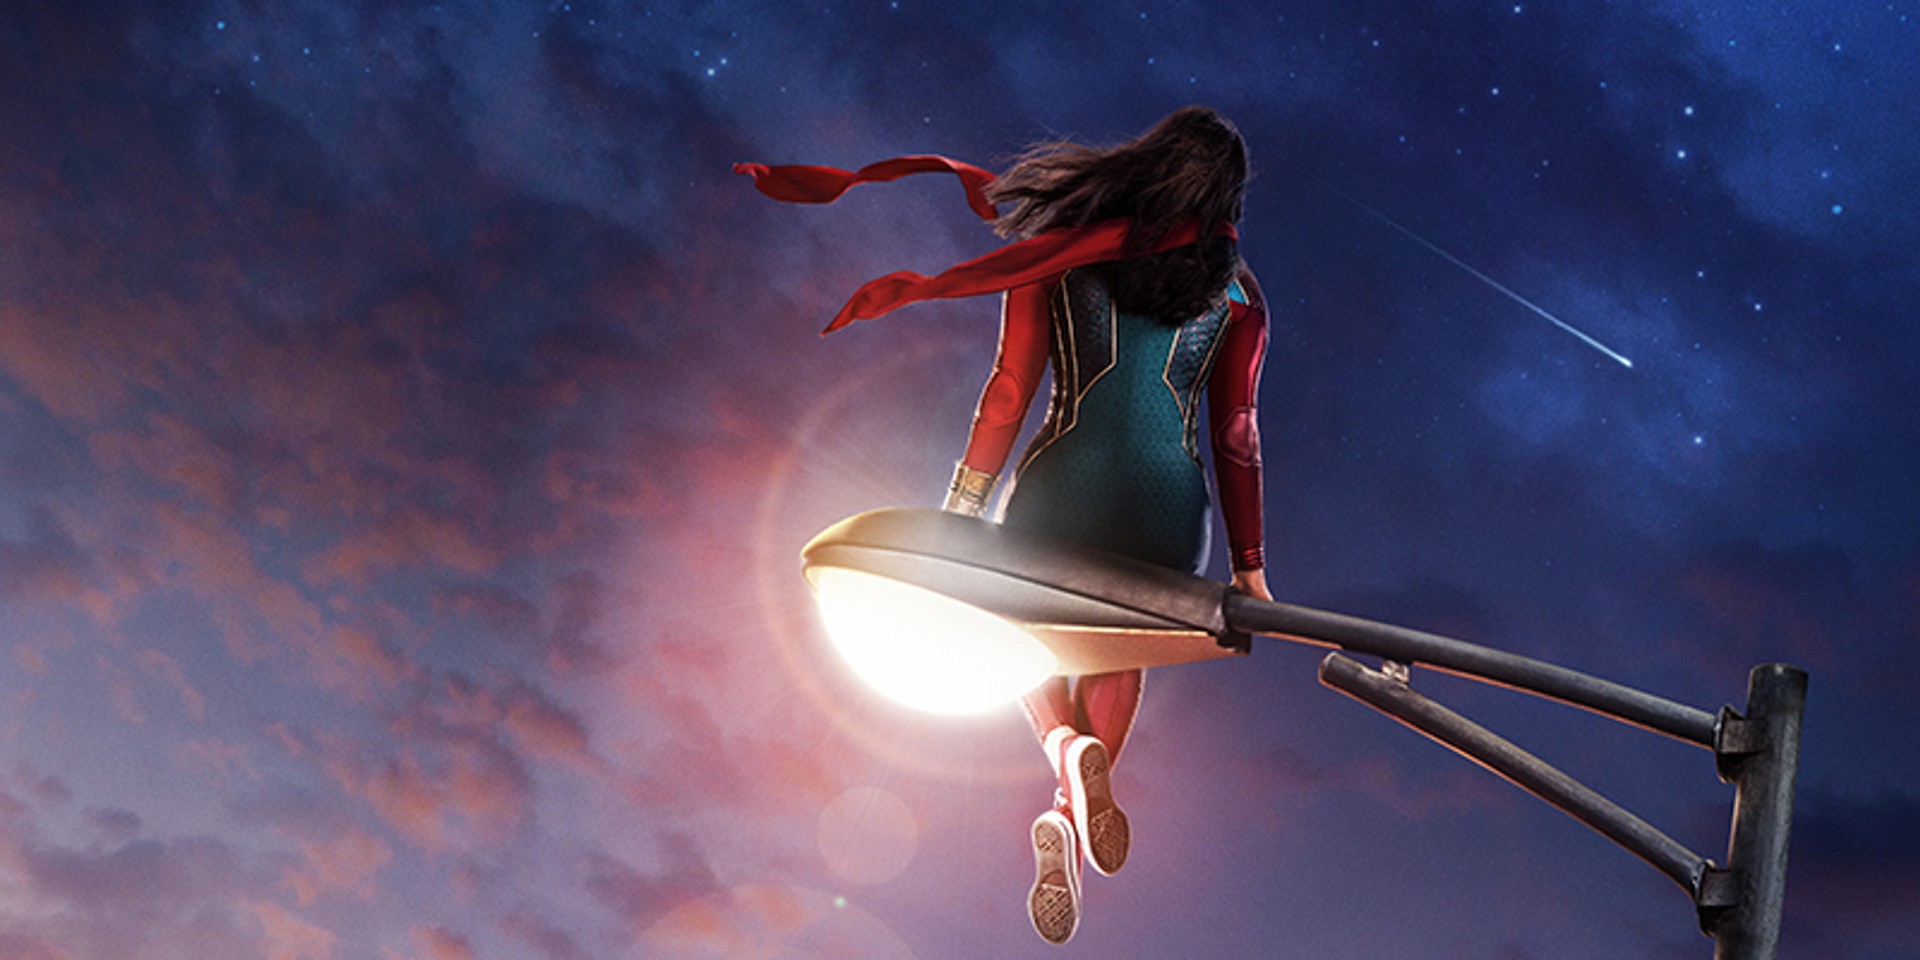 Disney+ shares first look of Marvel's first Muslim superhero, Ms